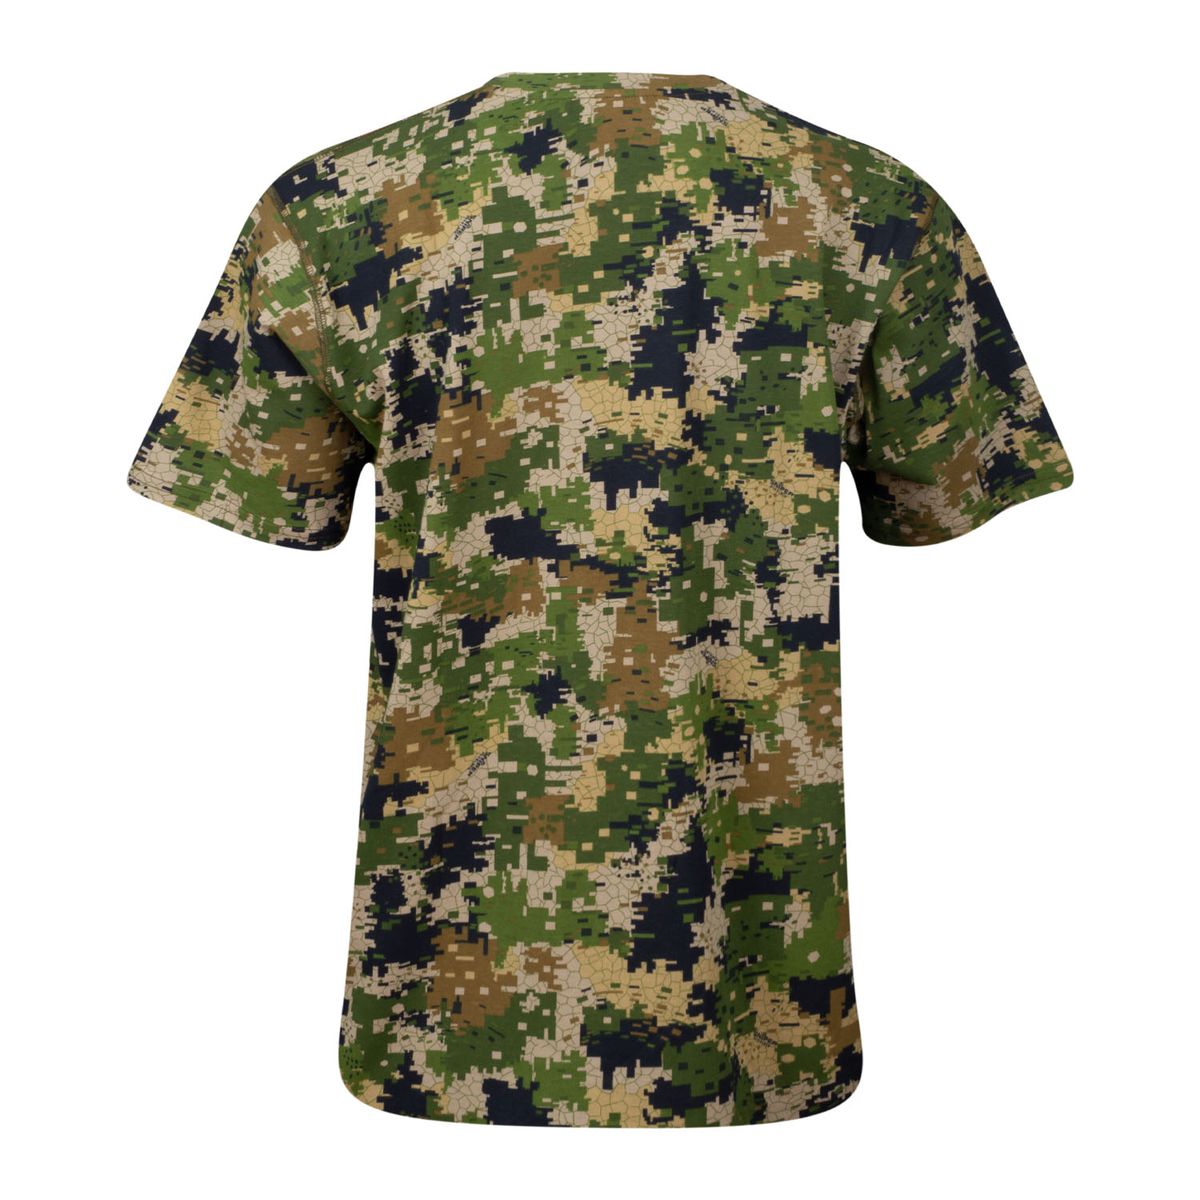 Sniper Pixelate Mens S/S Cotton T/Shirt Camouflage